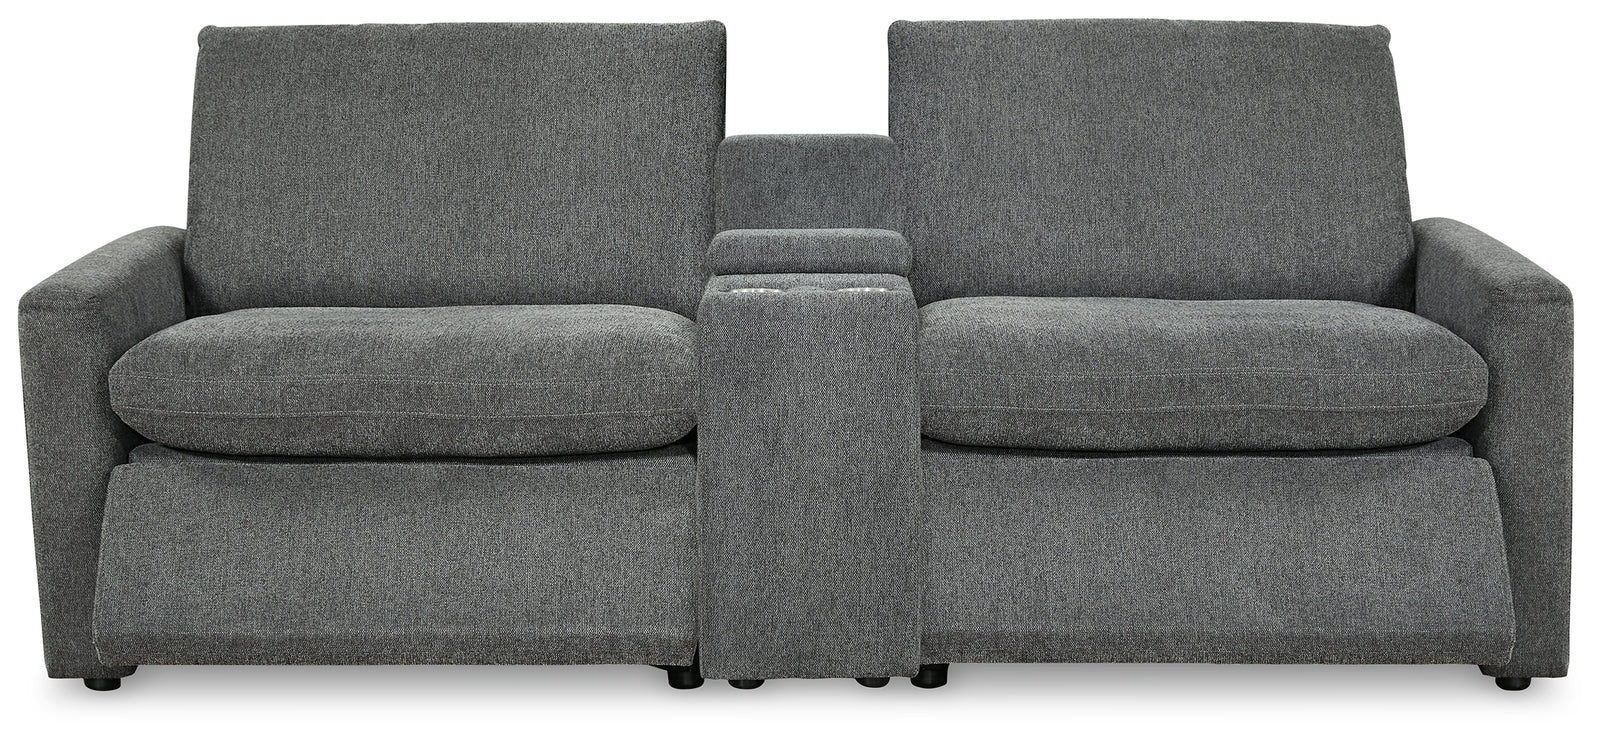 Hartsdale Granite 3-Piece Power Reclining Sectional 60508S10